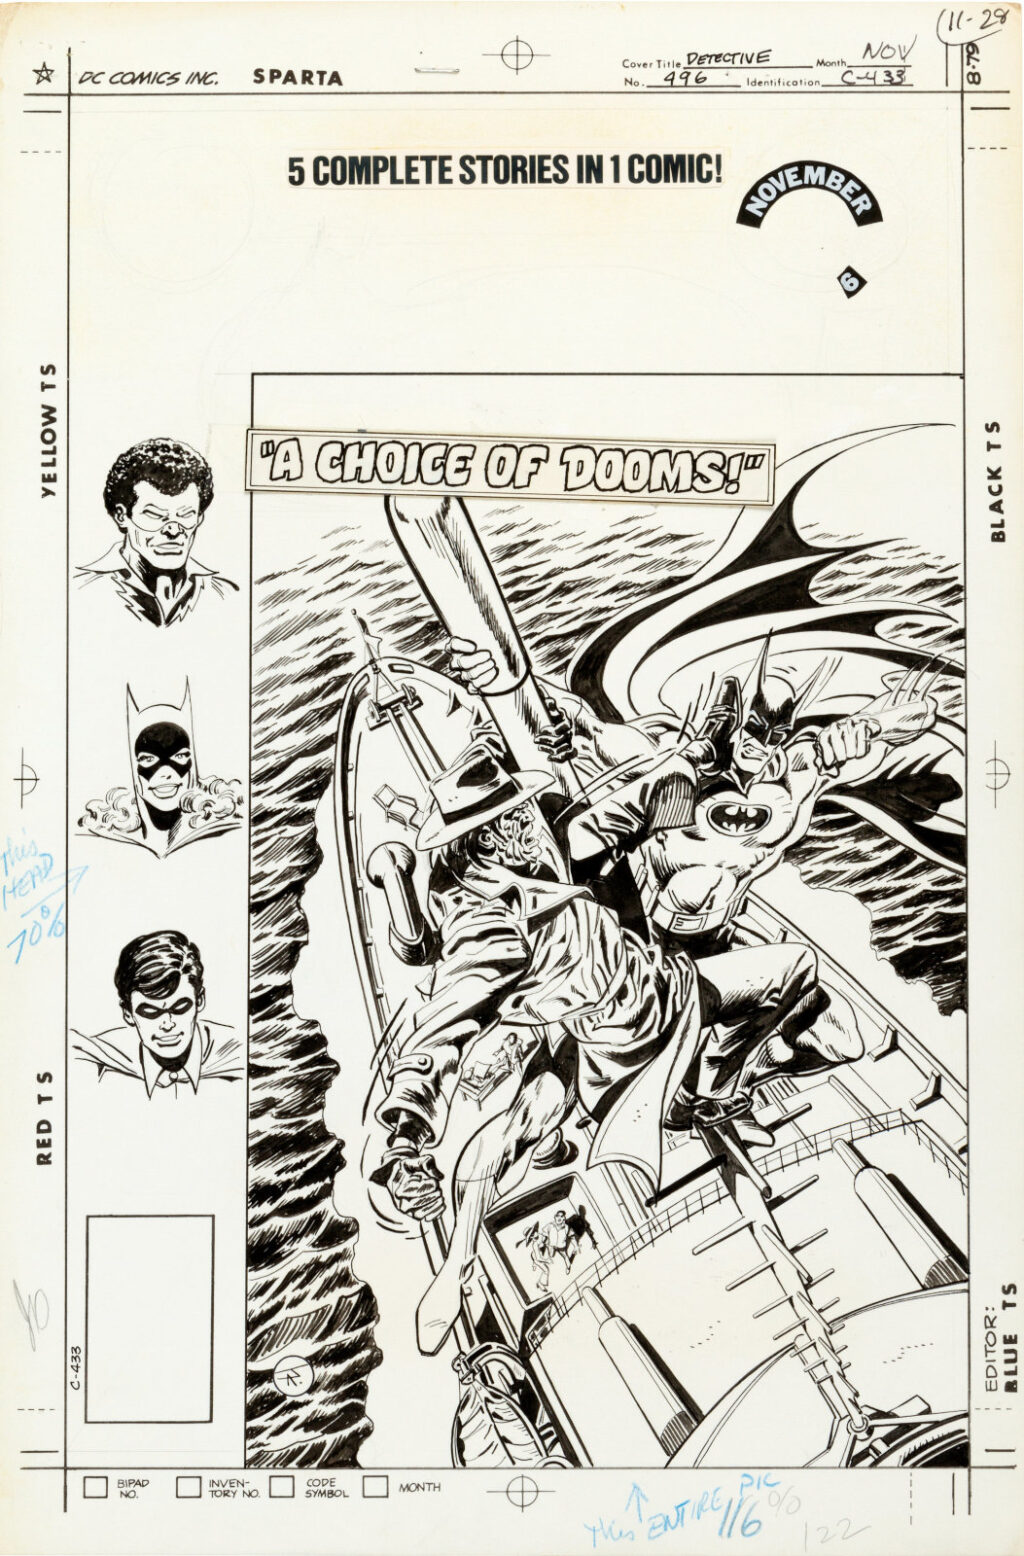 Detective Comics issue 496 cover by Jim Aparo